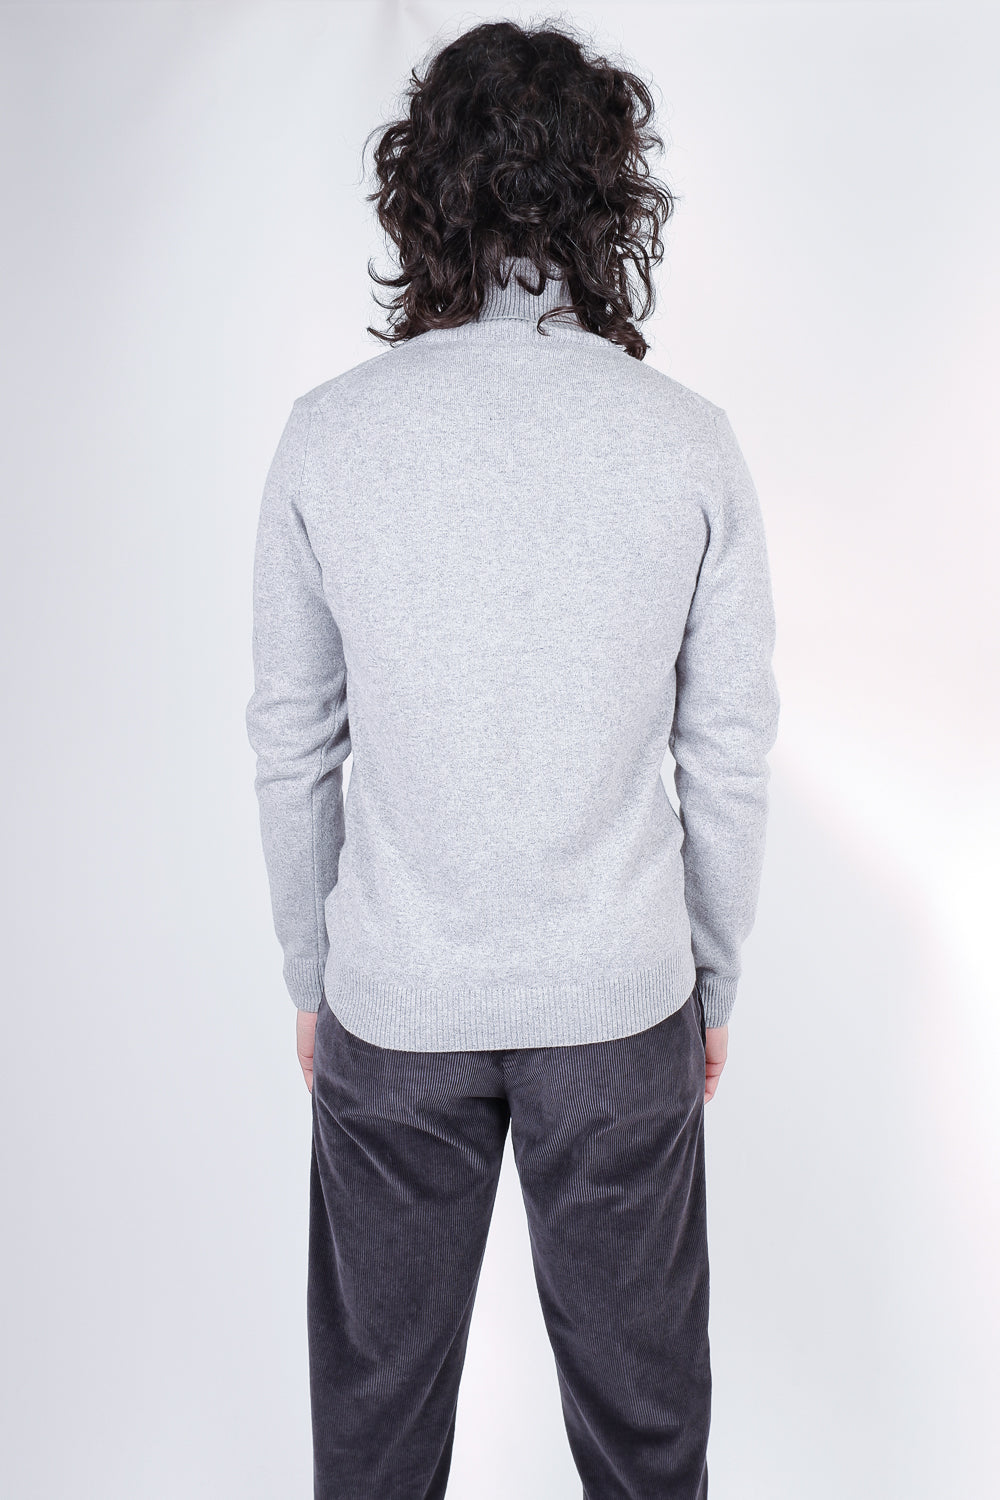 Buy the Daniele Fiesoli Roll Neck Sweater in Grey at Intro. Spend £50 for free UK delivery. Official stockists. We ship worldwide.